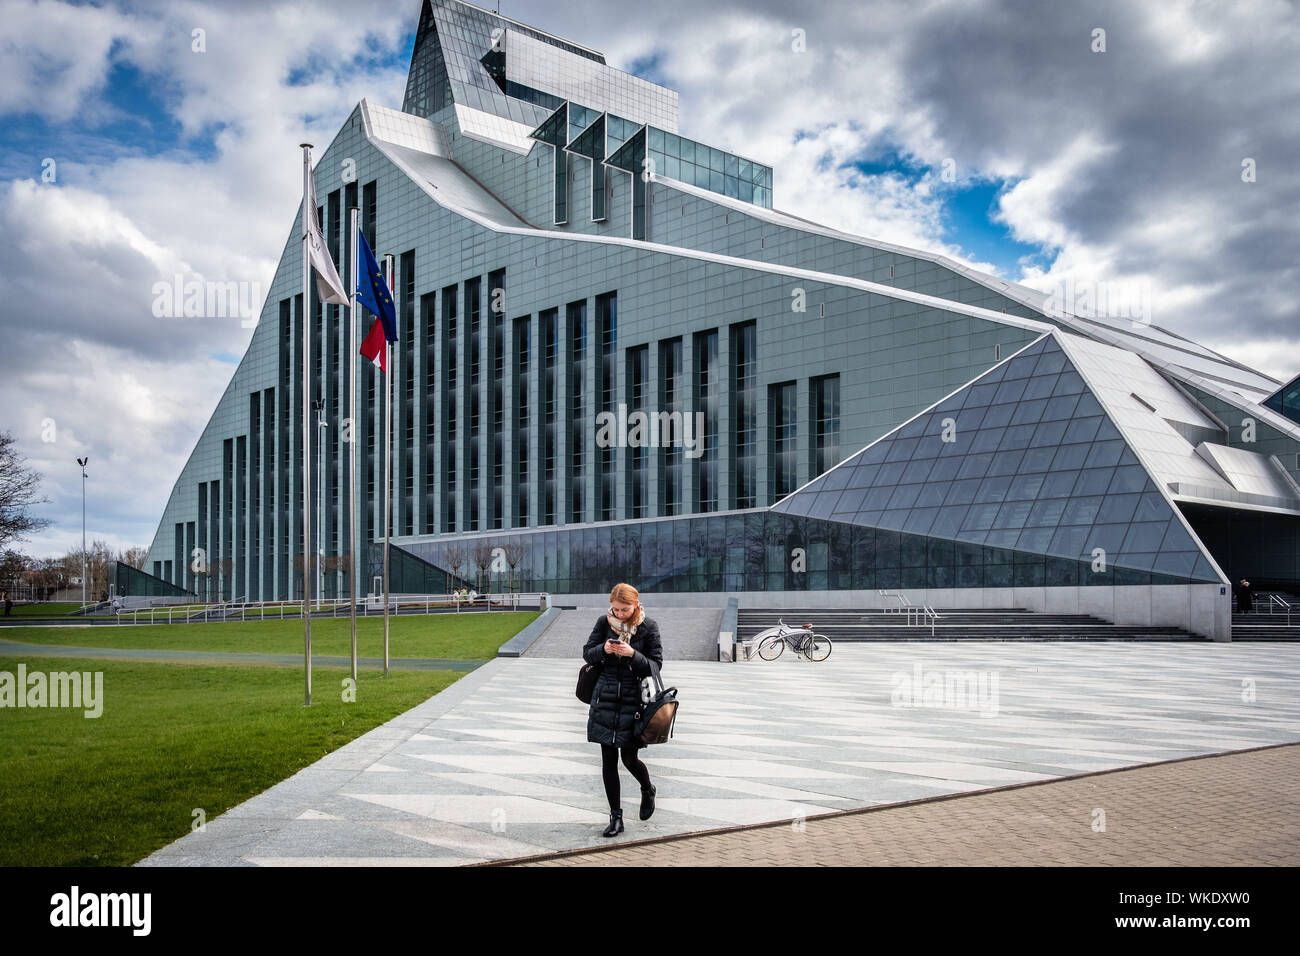 Latvia, Riga. The National library, 13-storey glass and metal building, with a collection of 6 million books, on the banks of the Dauvaga river. Woman Stock Photo